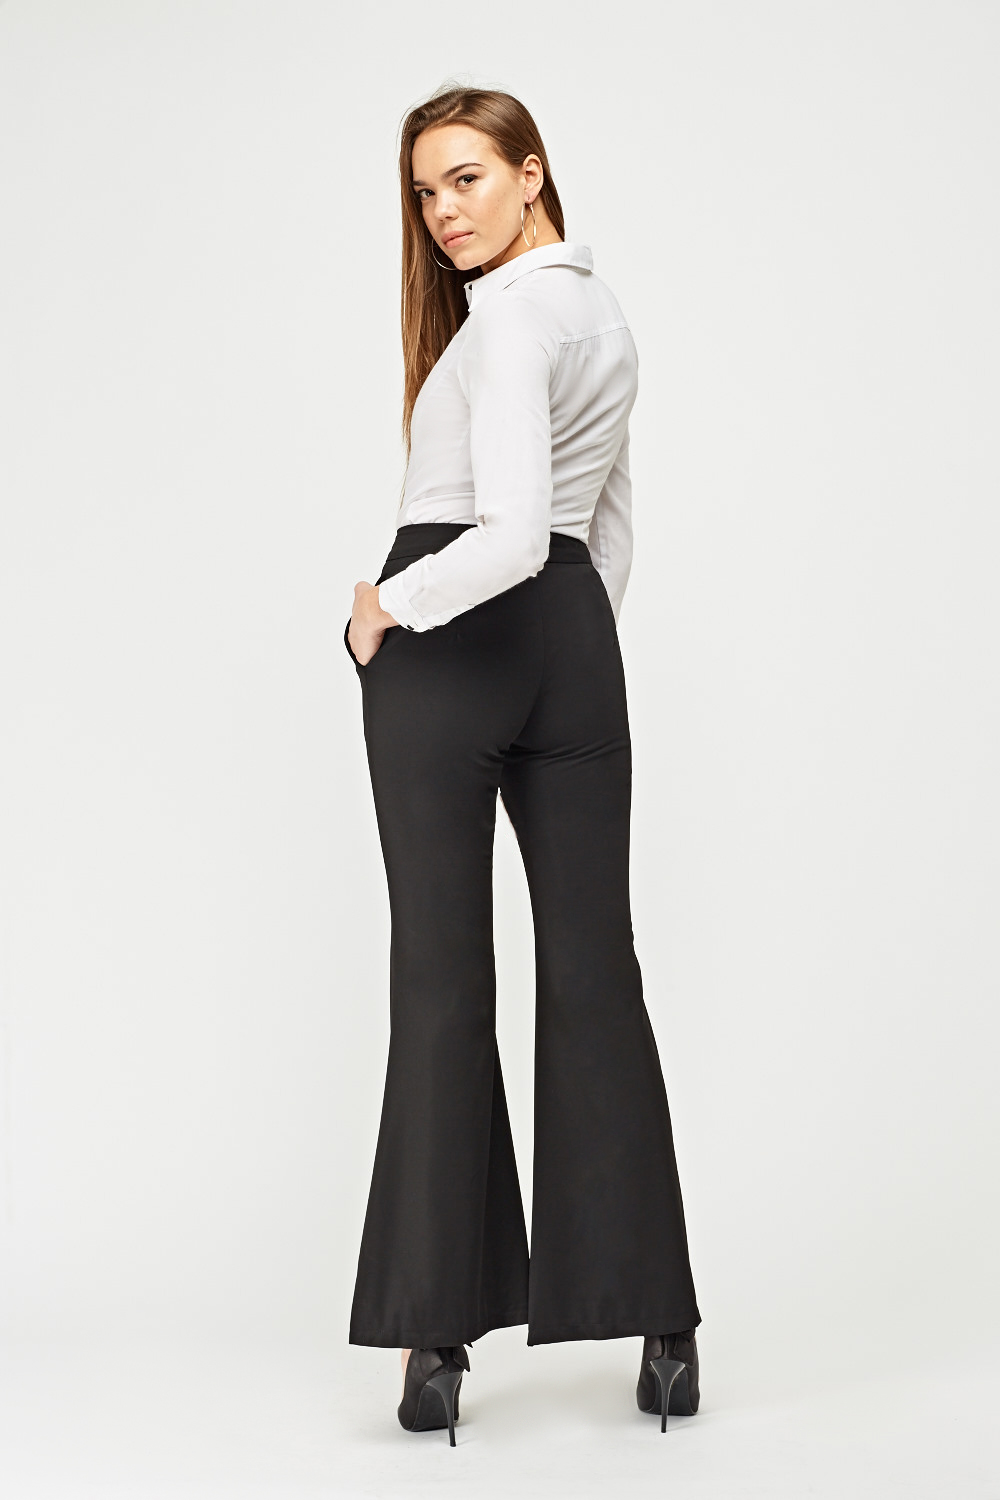 Susan Zheng Flared Tailored Trousers - Just $6